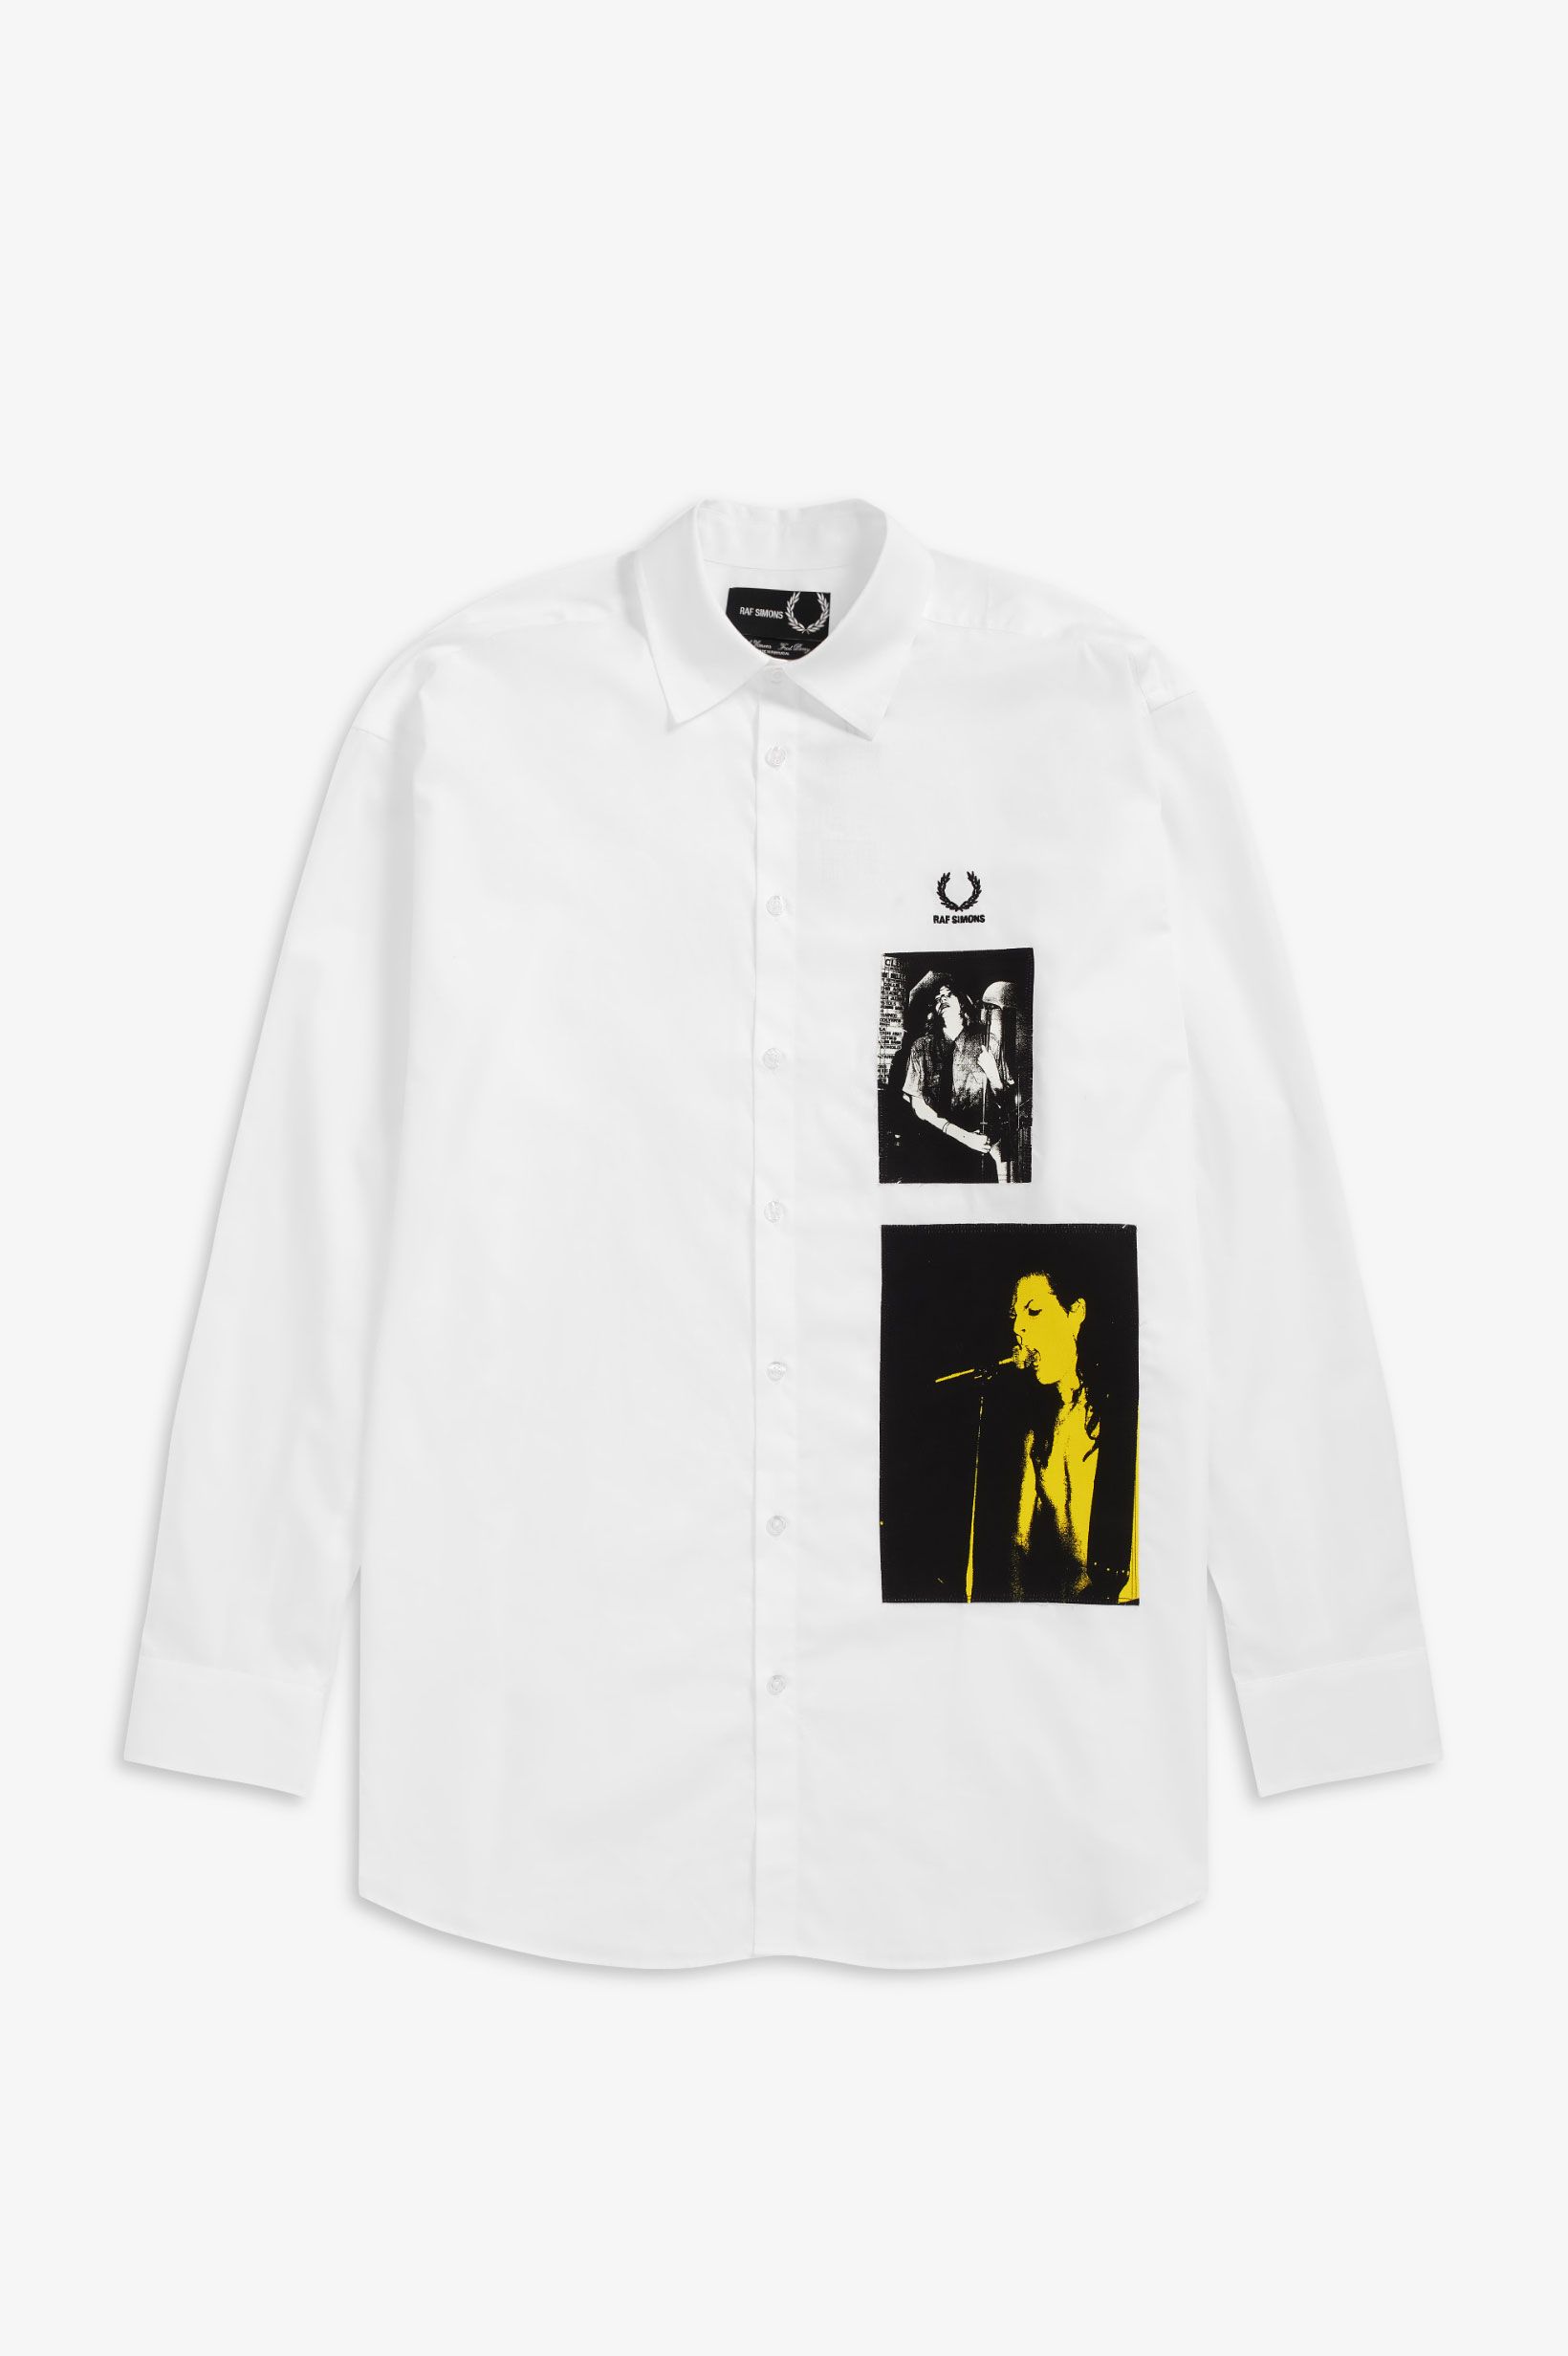 Fred Perry x Raf Simons capsule inspired by London punk subcultures